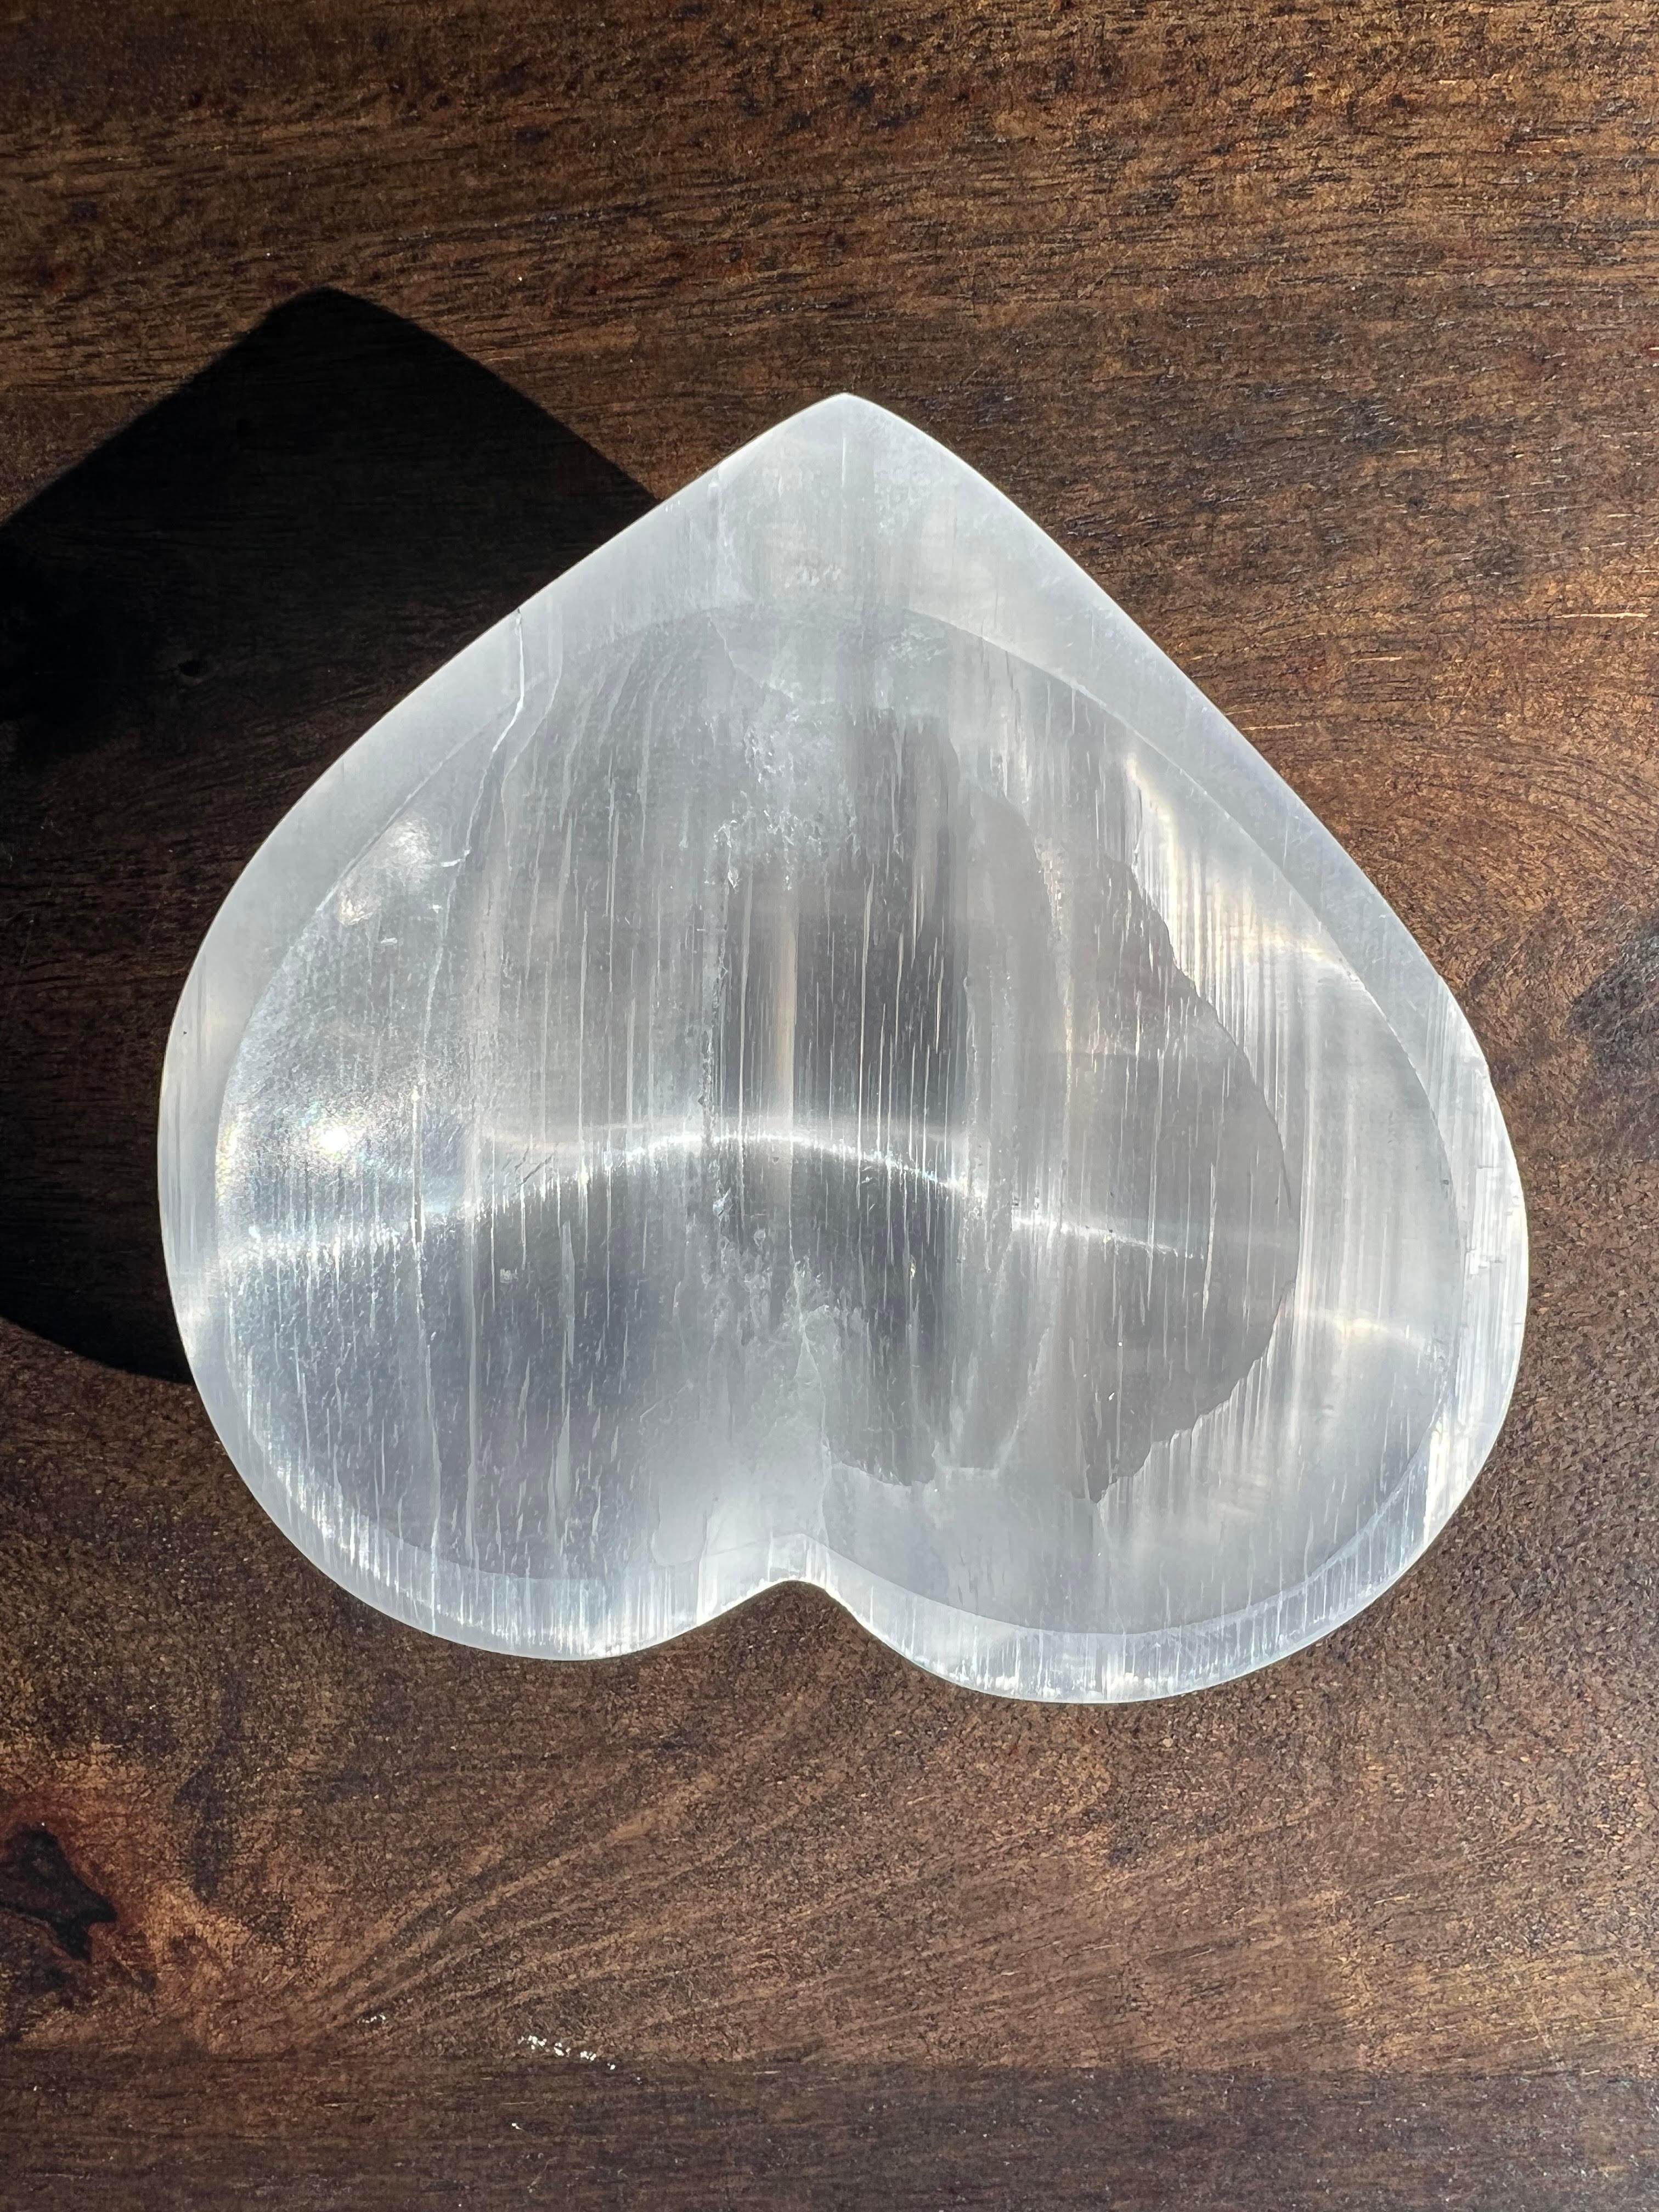 Crystal Charging Bowl in Heart Shape Healing Ability Selenite Bowls Crystals Stone With 7 Stone Chakra 925 Sterling Silver Chain Pendant - YoTreasure